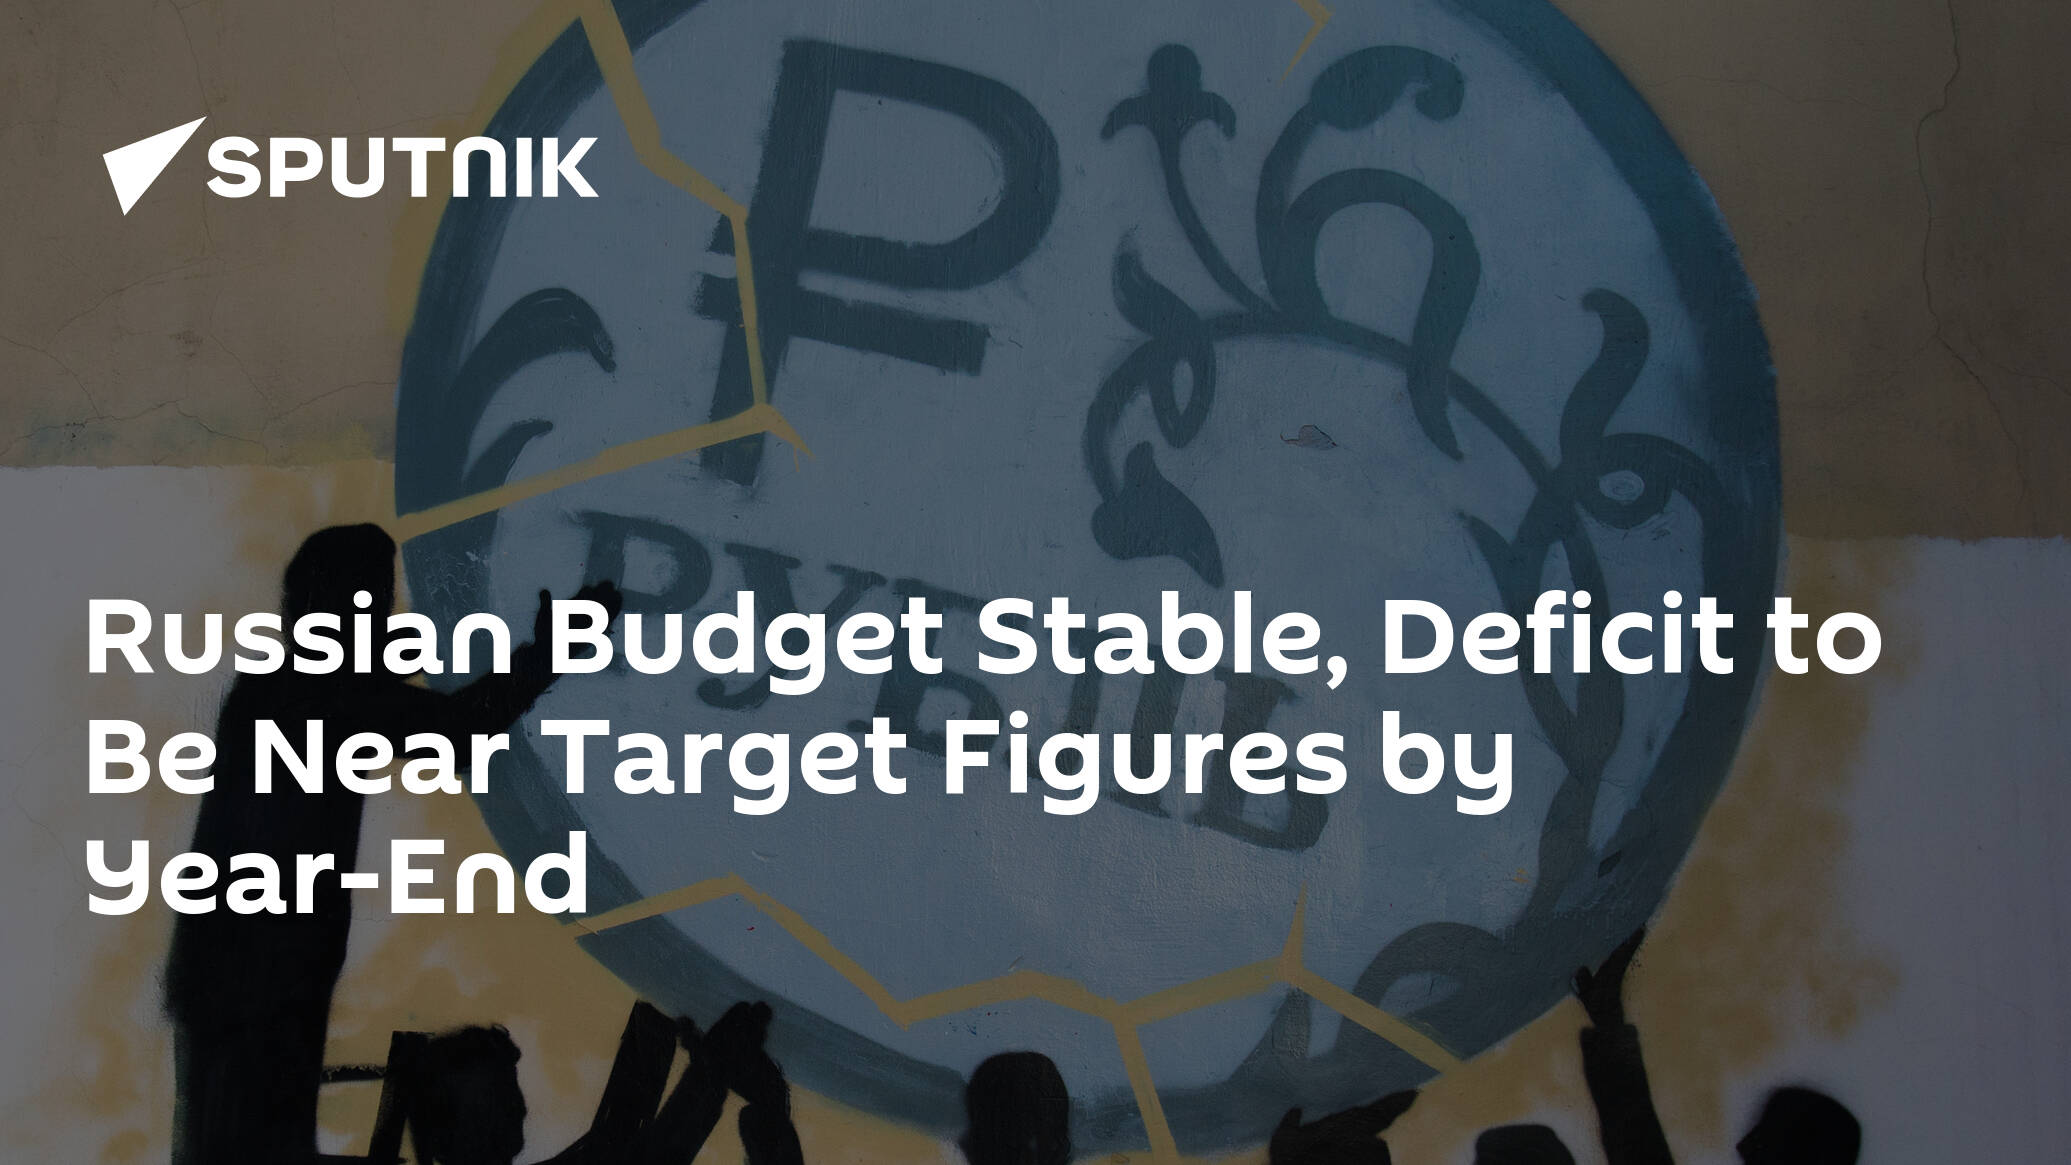 Russian Budget Stable, Deficit to Be Near Target Figures by Year-End